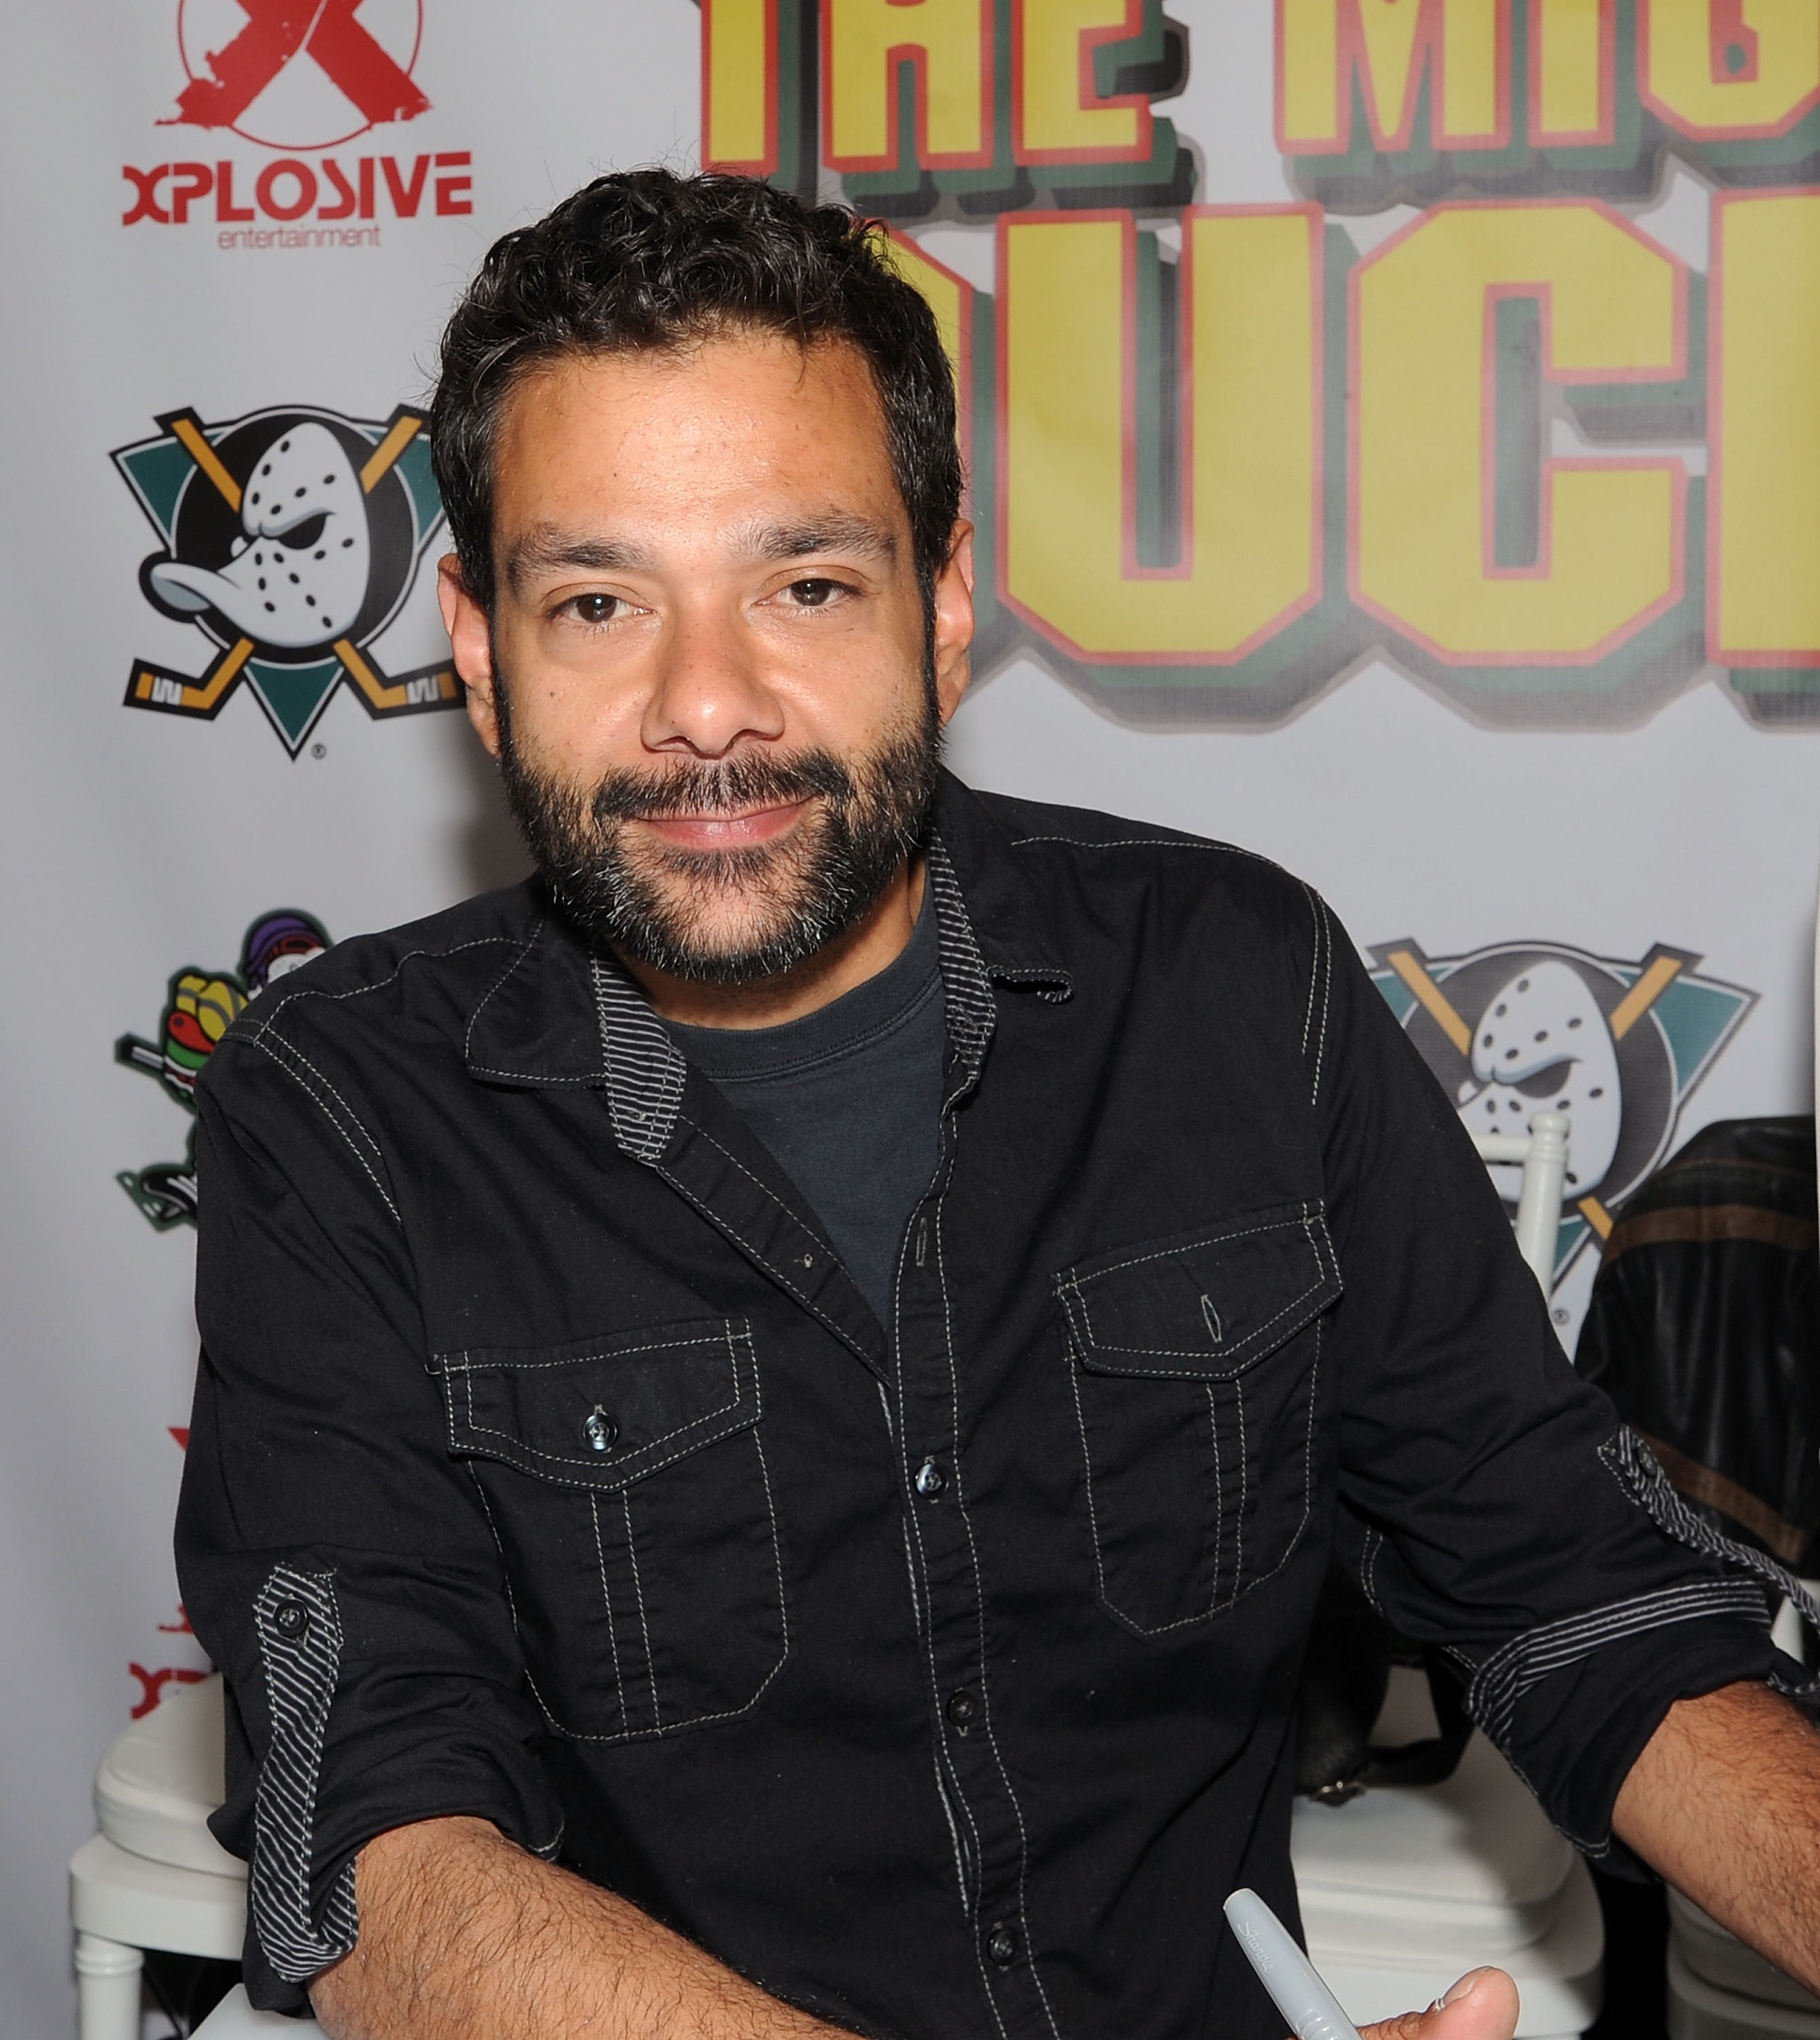 Shaun Weiss from the movie "The Mighty Ducks" attends day 2 of the Chiller Theater Expo at Sheraton Parsippany Hotel on April 25, 2015. | Source: Getty Images